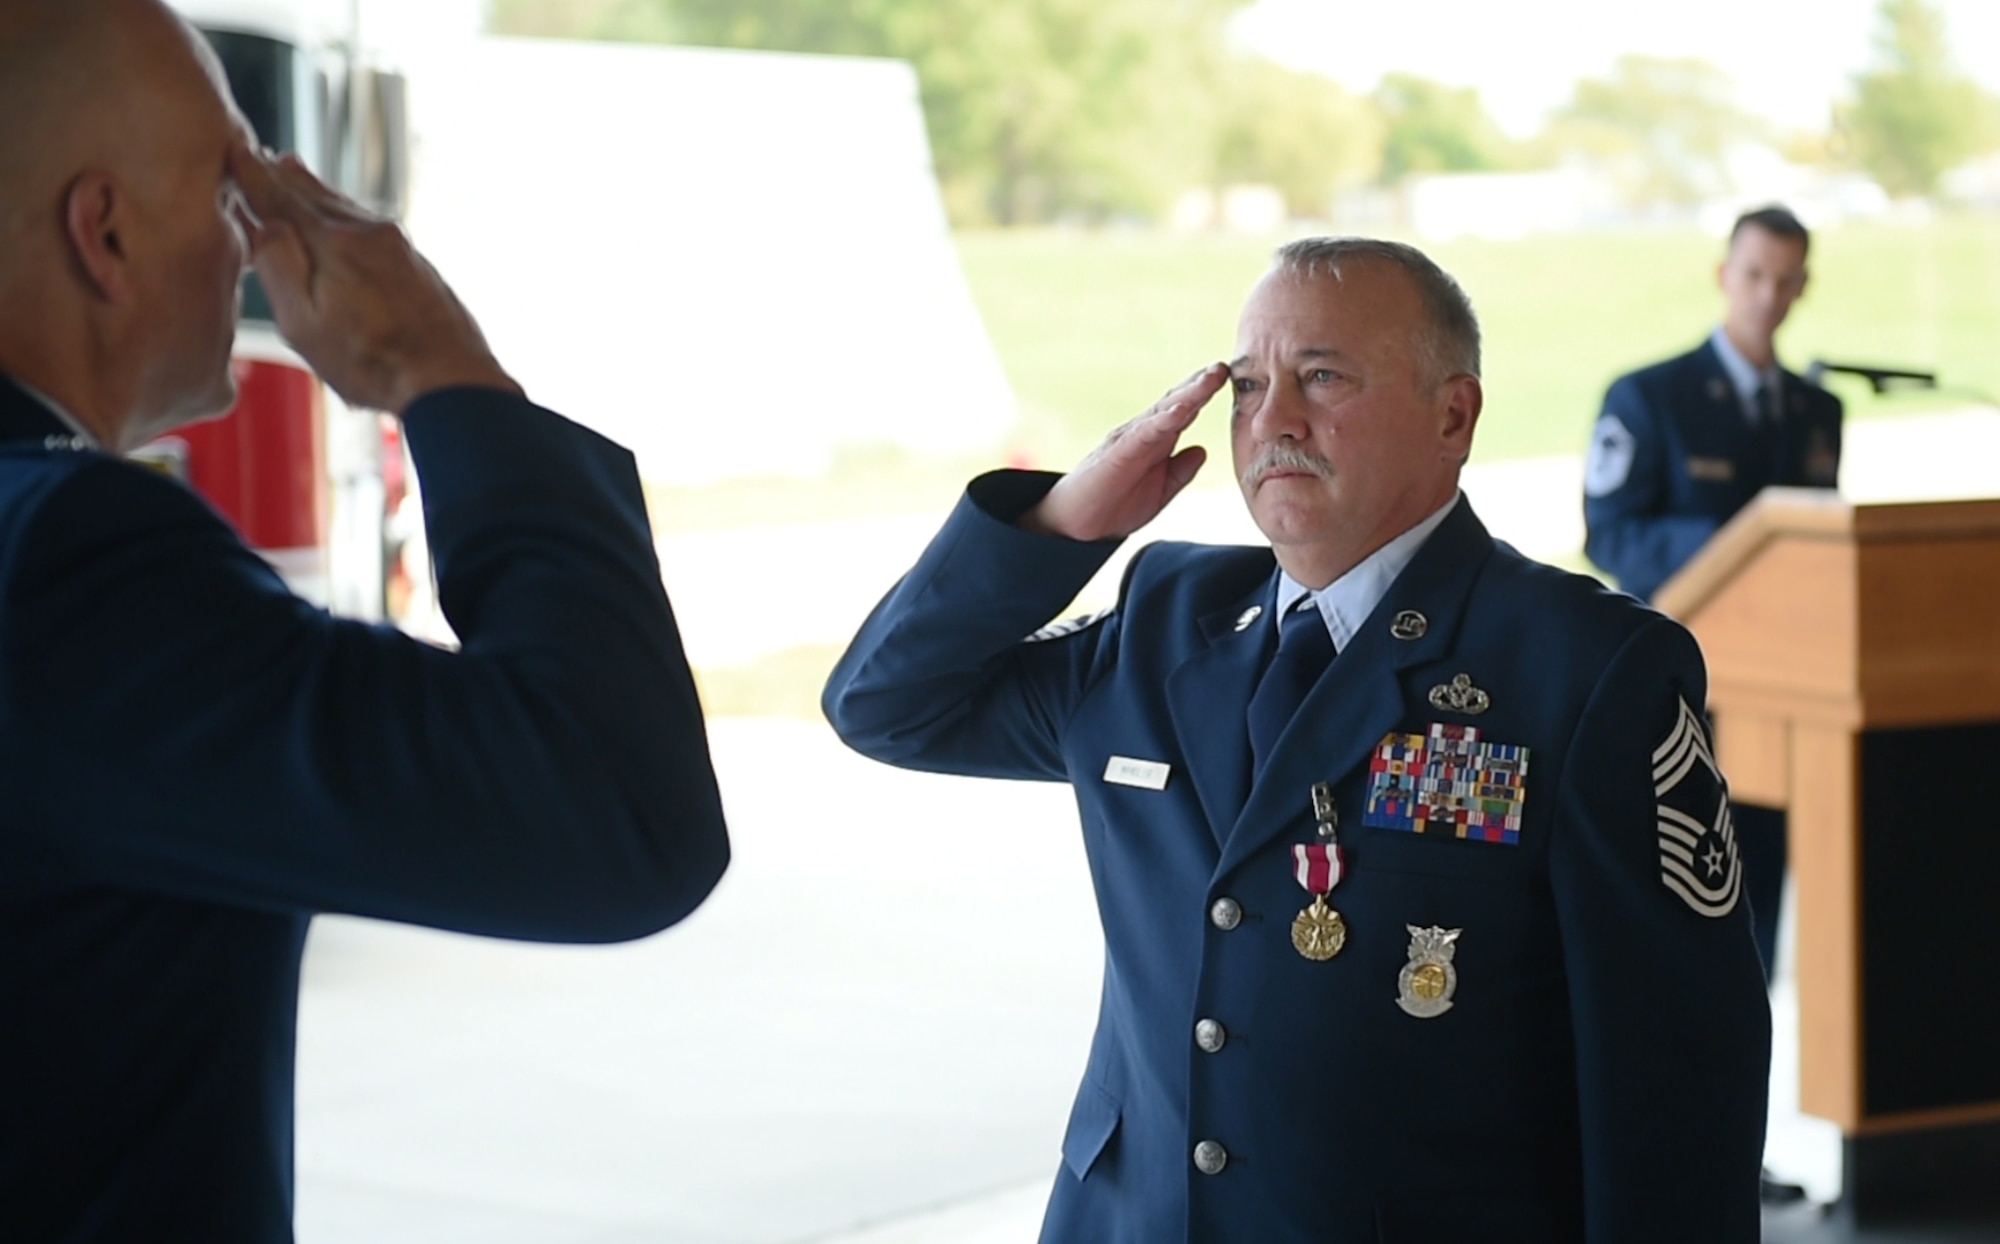 Chief Master Sgt. Timothy Whisler, 132d Fire and Emergency Services chief, salutes his commander Lt. Col. Robert Devens during his retirement ceremony September 19, 2020 at the 132d Wing in Des Moines, Iowa. Whisler  received the Meritorious Service Medal with two oak leaf clusters during the ceremony. (U.S. Air National Guard photo by Tech. Sgt. Michael J. Kelly)